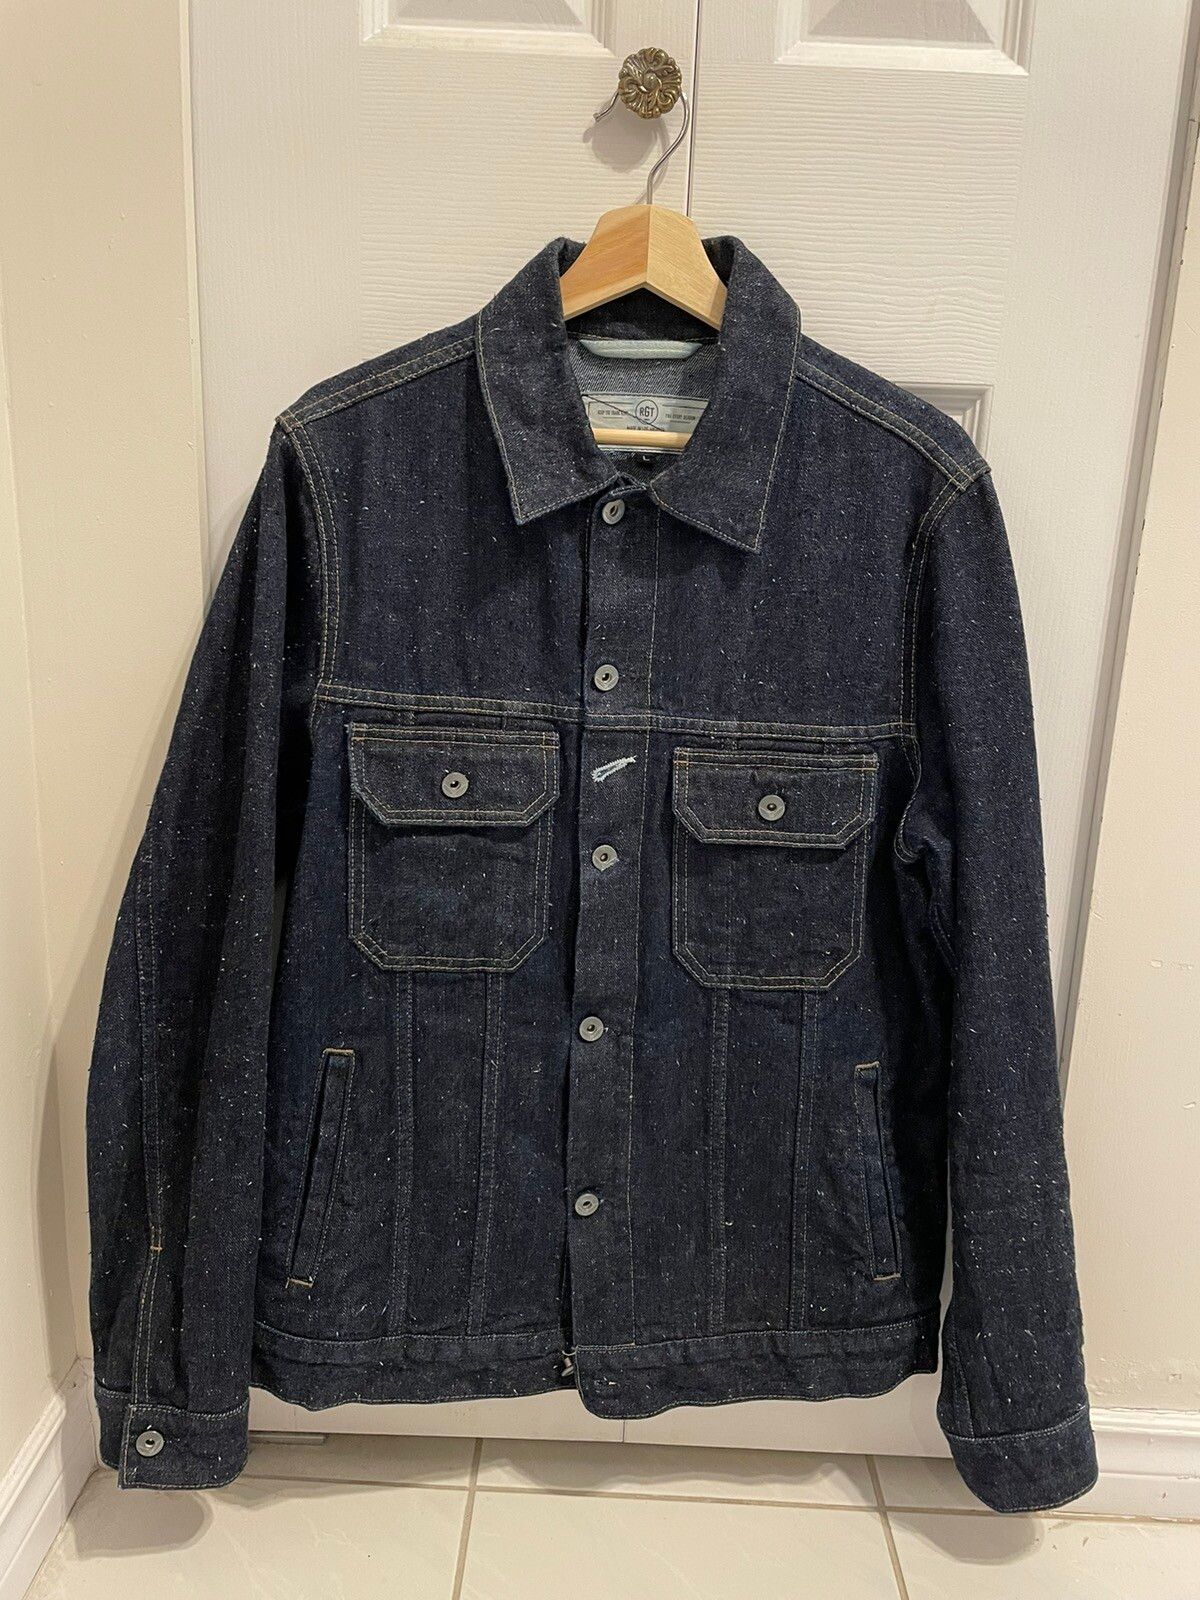 Rogue Territory RGT Neppy Cruiser Jacket | Grailed